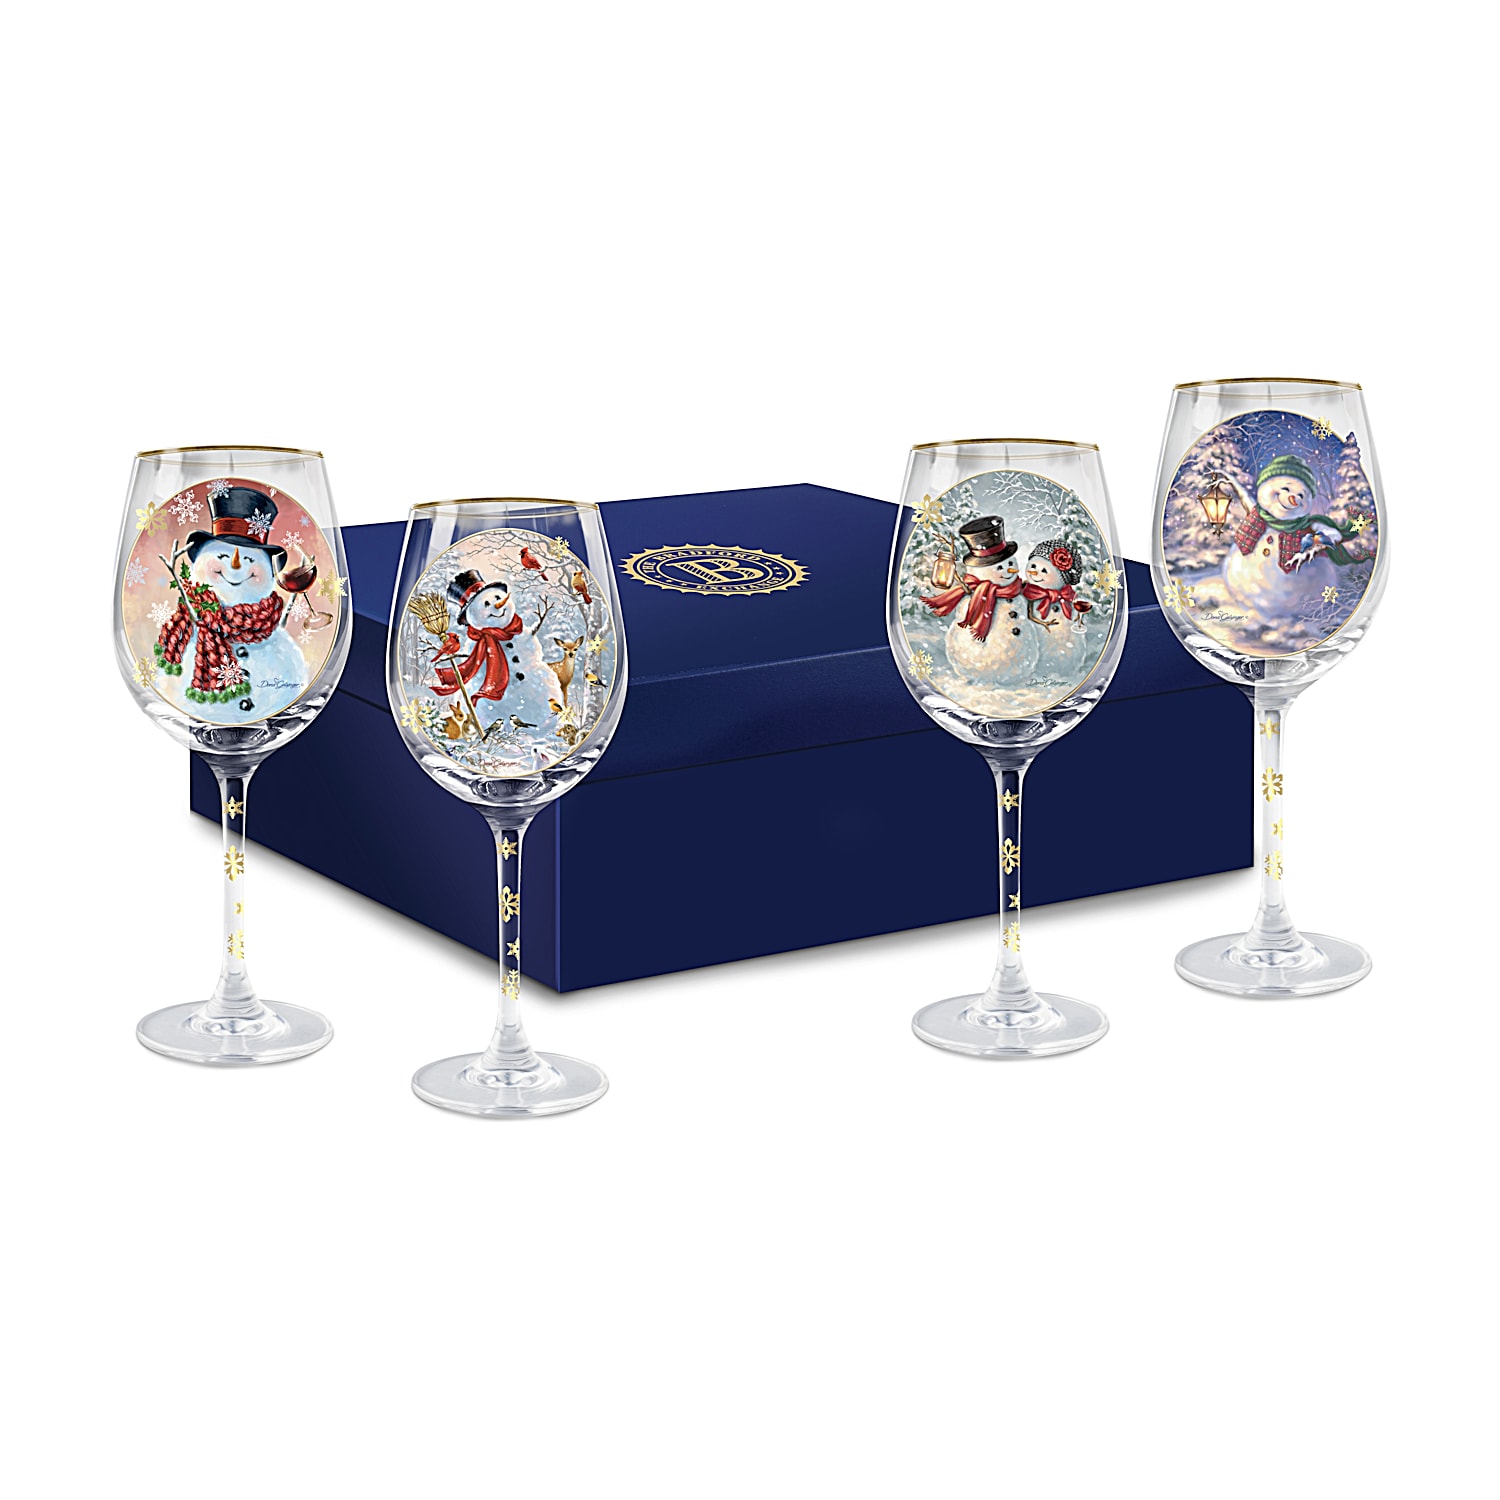 Set Of Disney Wine Glasses for Sale in West Palm Beach, FL - OfferUp